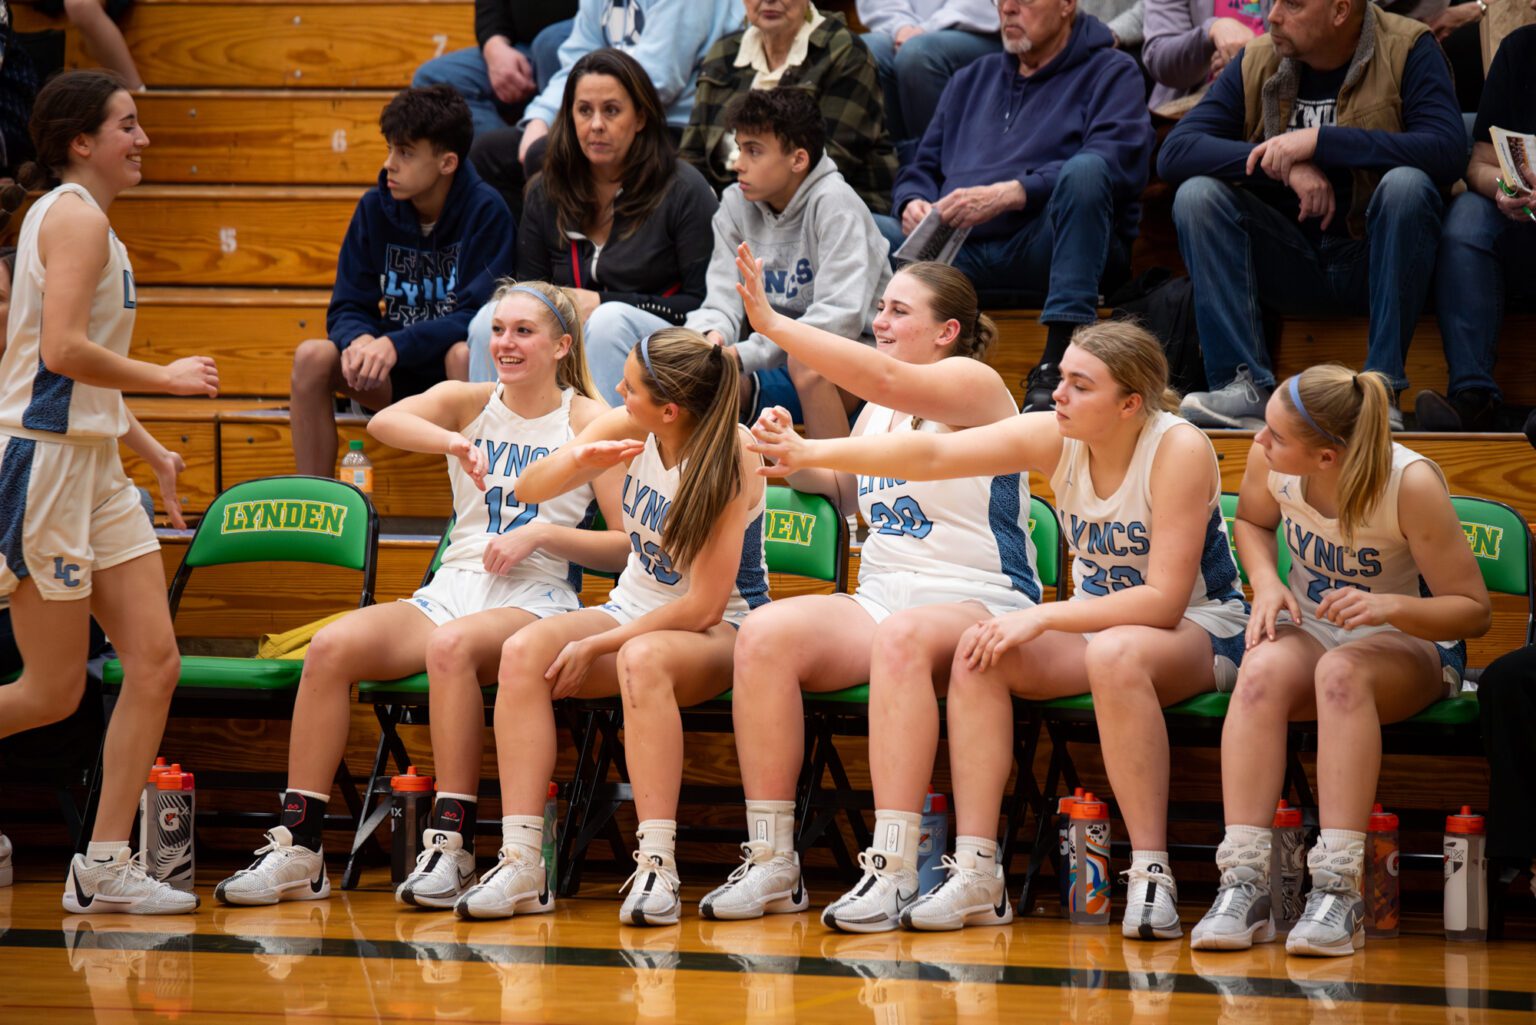 Hive-fives await Lynden Christian sophomore guard Estela Hernandez Friday, Feb. 16 as she joins the rest of the starters on the bench towards the end of the Lyncs' 62-12 win over Meridian in the 1A District 1 consolation final at Lynden High School.